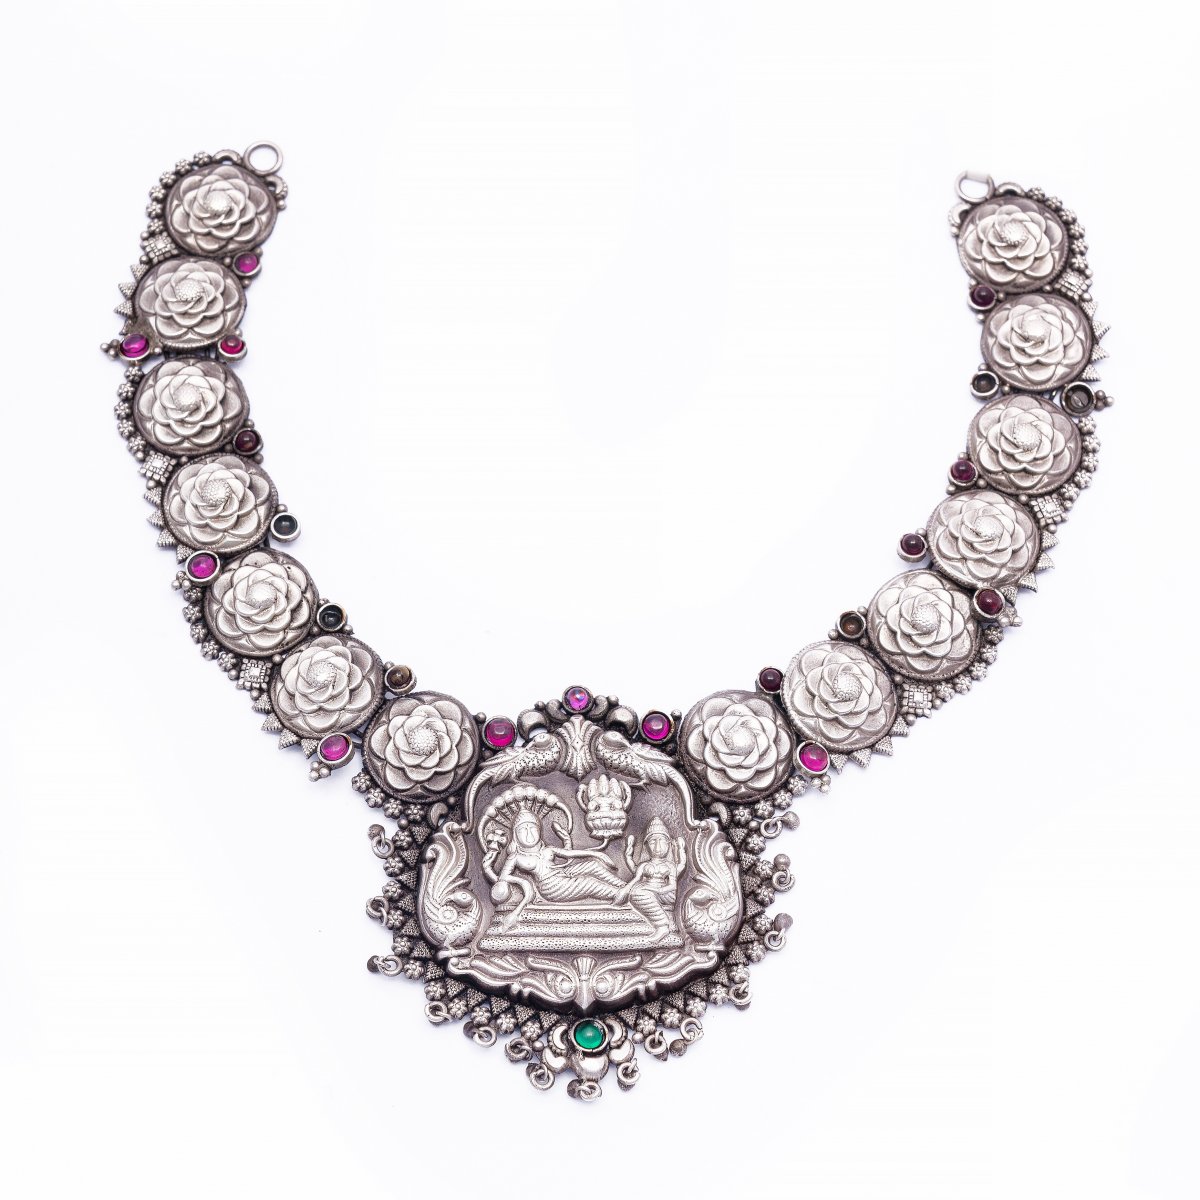 92.5 SILVER TRADITIONAL TEMPLE JEWELLERY NECKLACE FOR WOMEN 